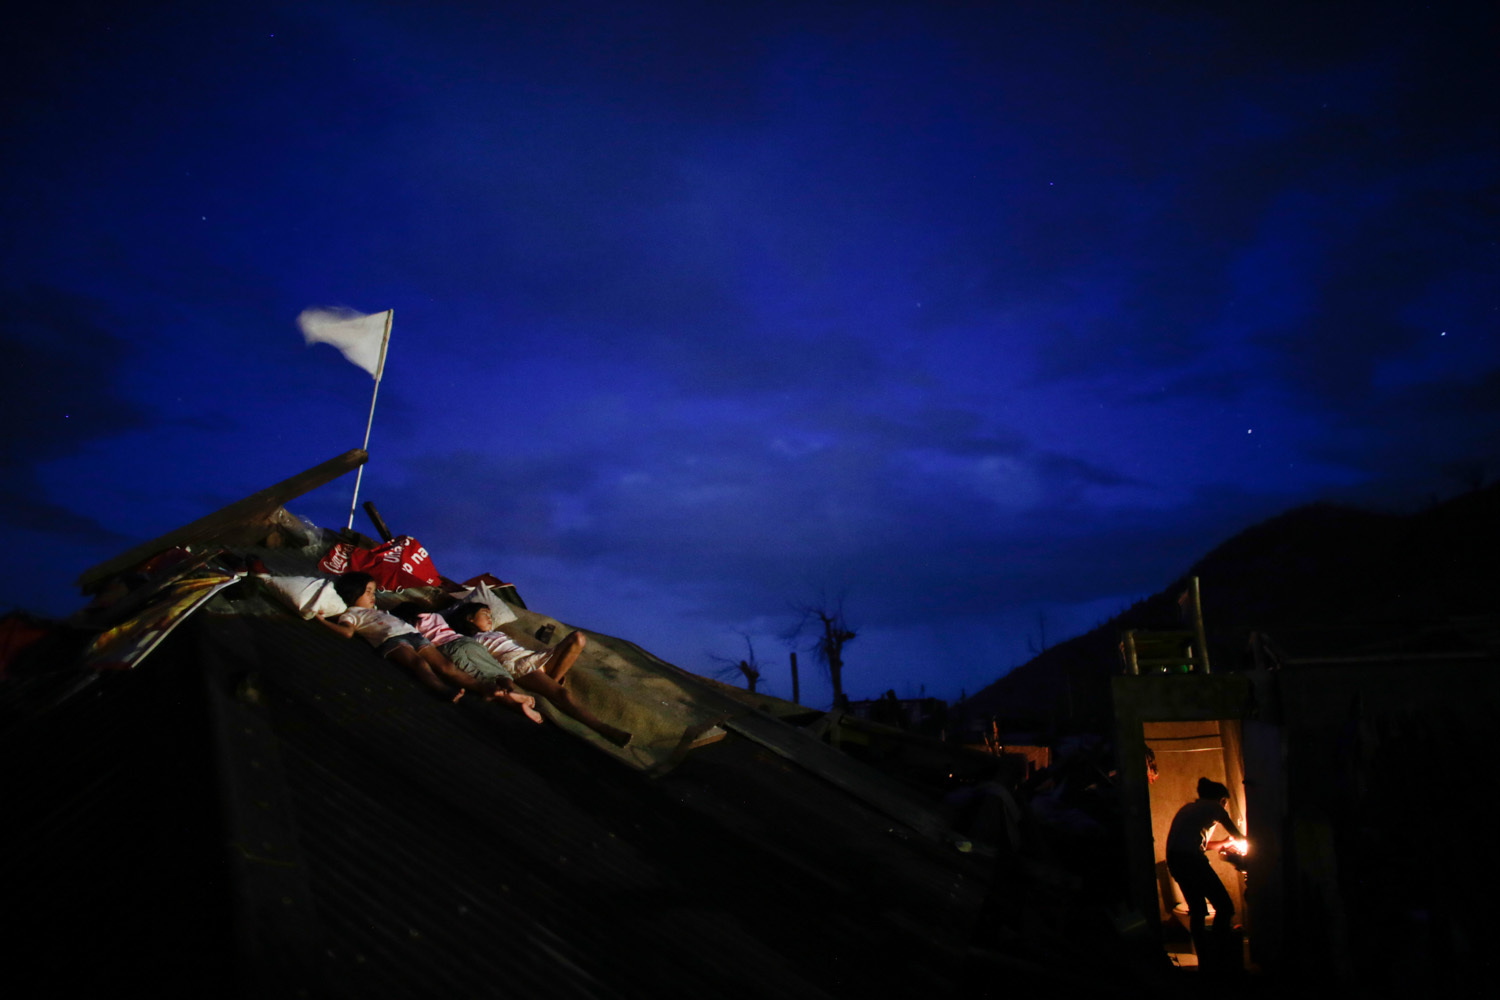  Children sleep on the collapsed roof of their house as their mother prepares dinner in Palo, Leyte   